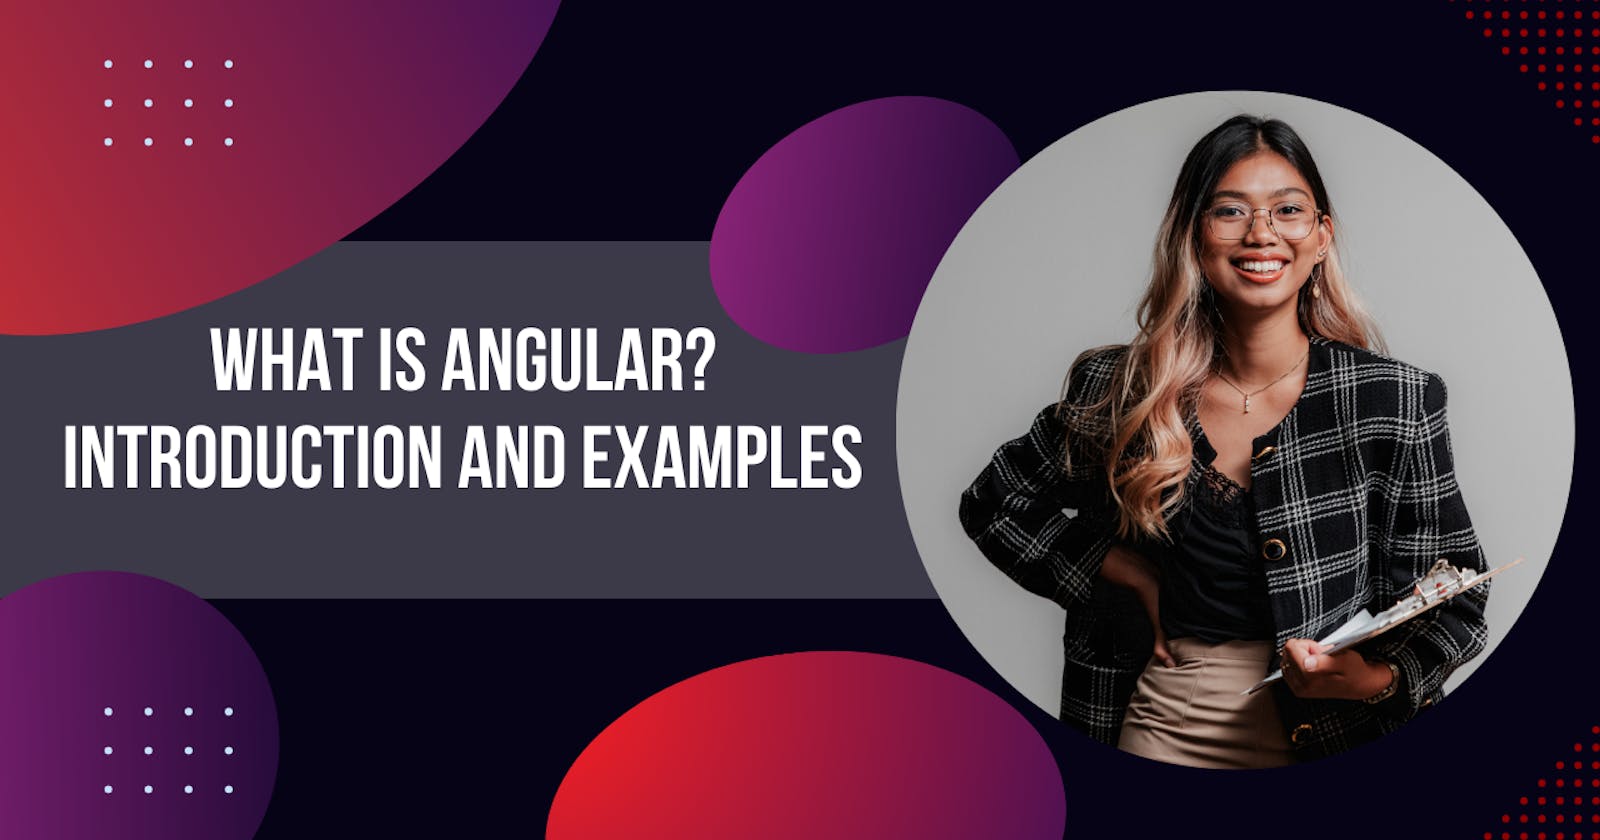 What is Angular? Introduction and examples